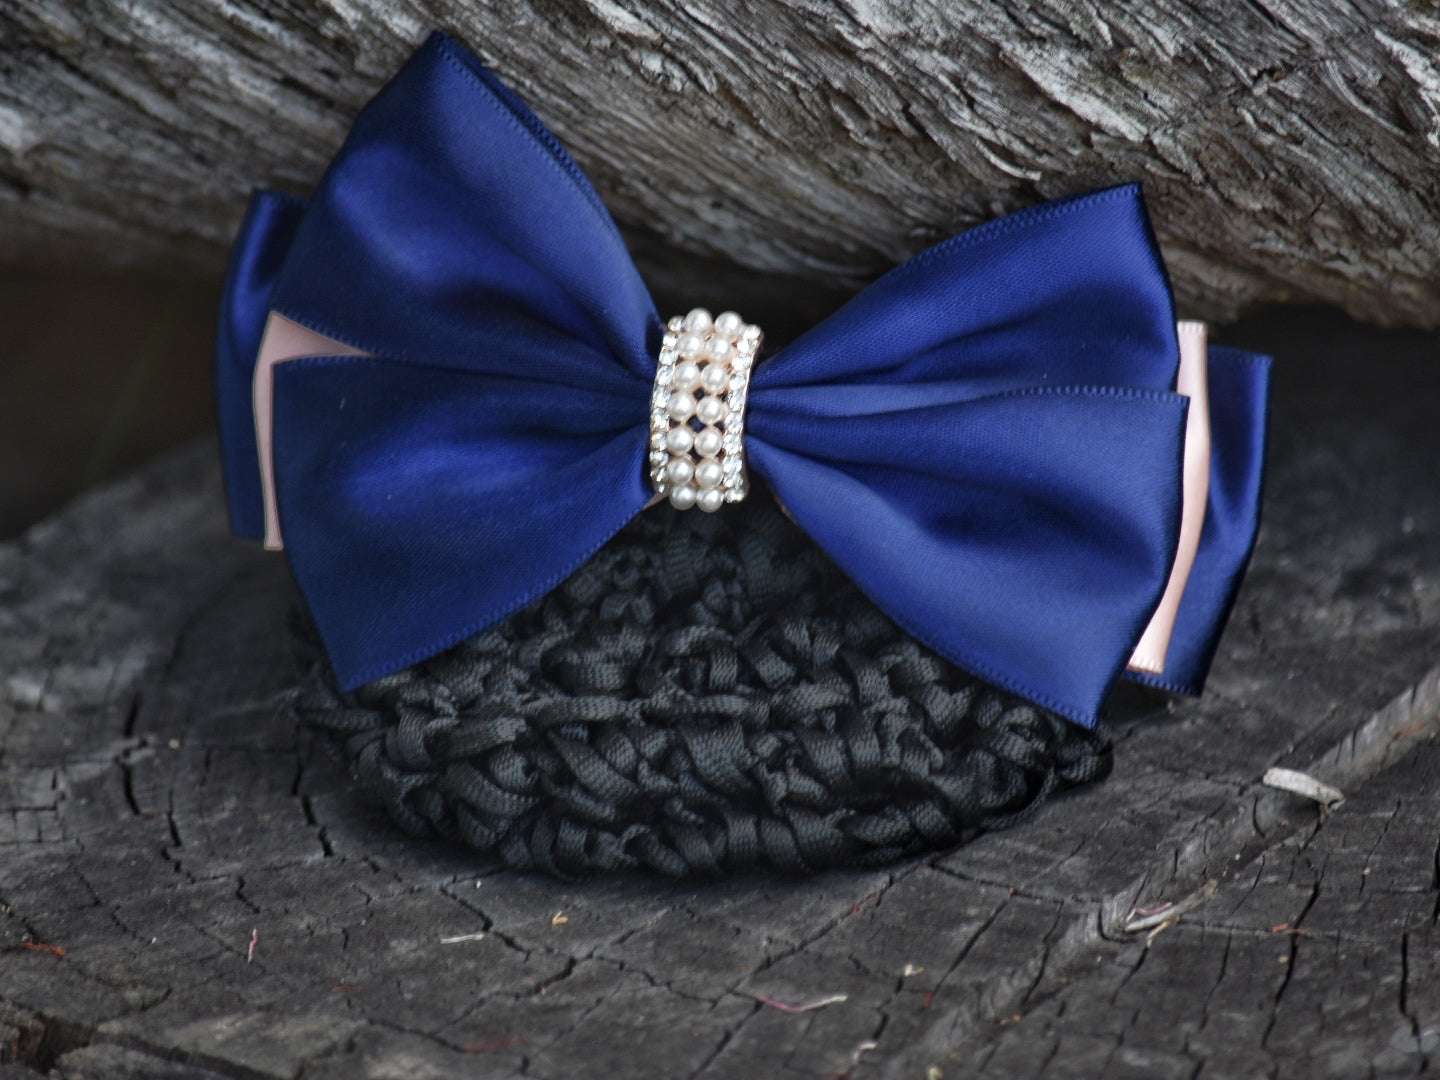 Horse Show Hair Snood with delicate Pearl Bead & Crystal Clasp